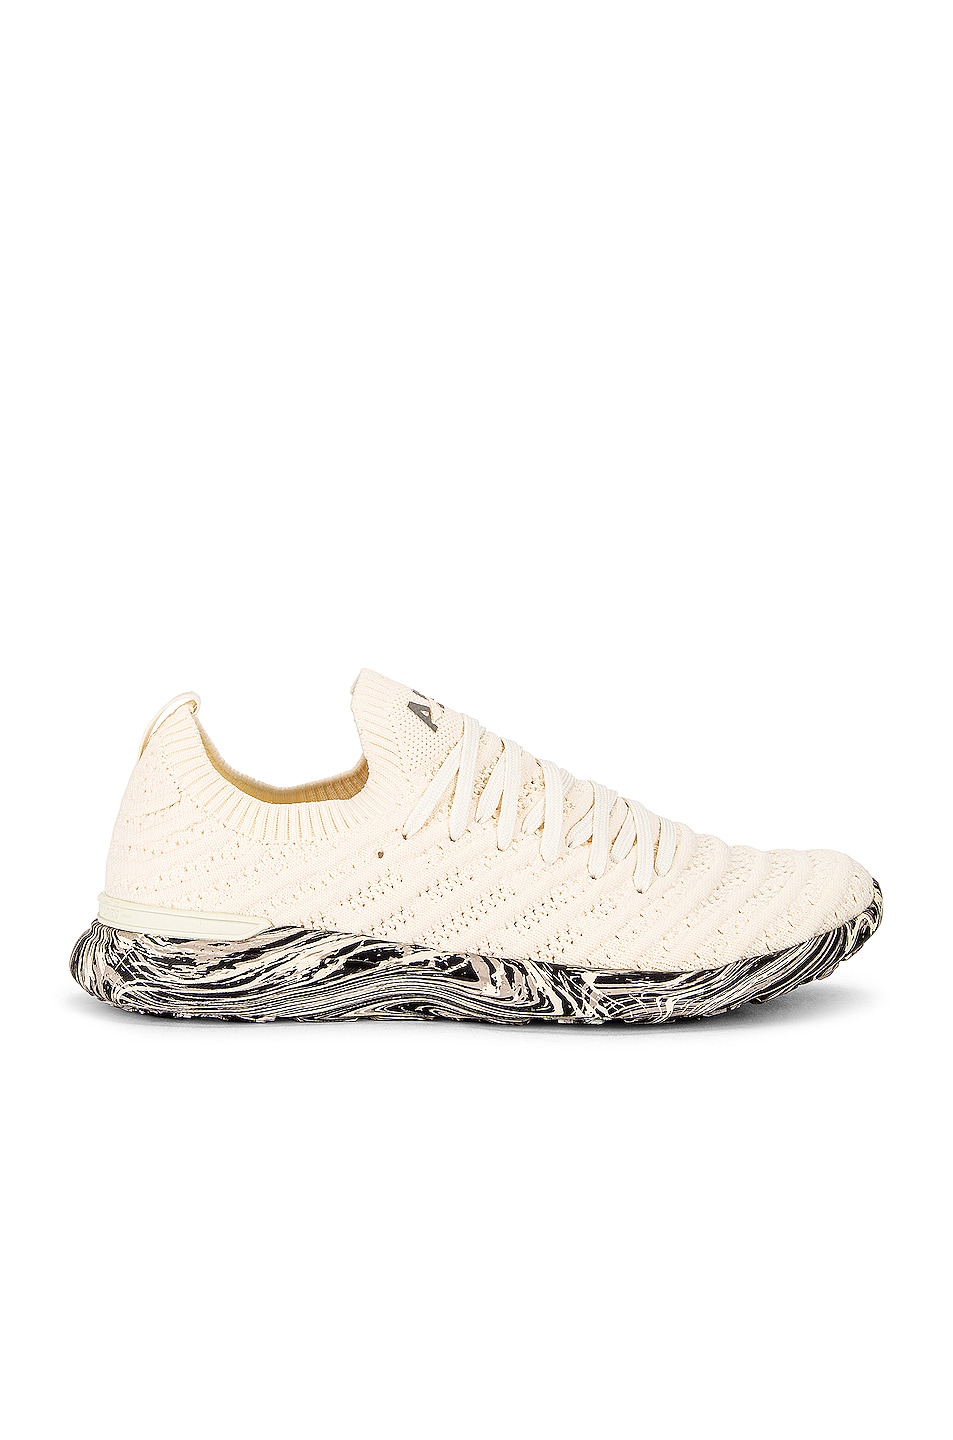 Image 1 of APL: Athletic Propulsion Labs Techloom Wave Sneaker in Pristine, Silver Travertine, & Marble